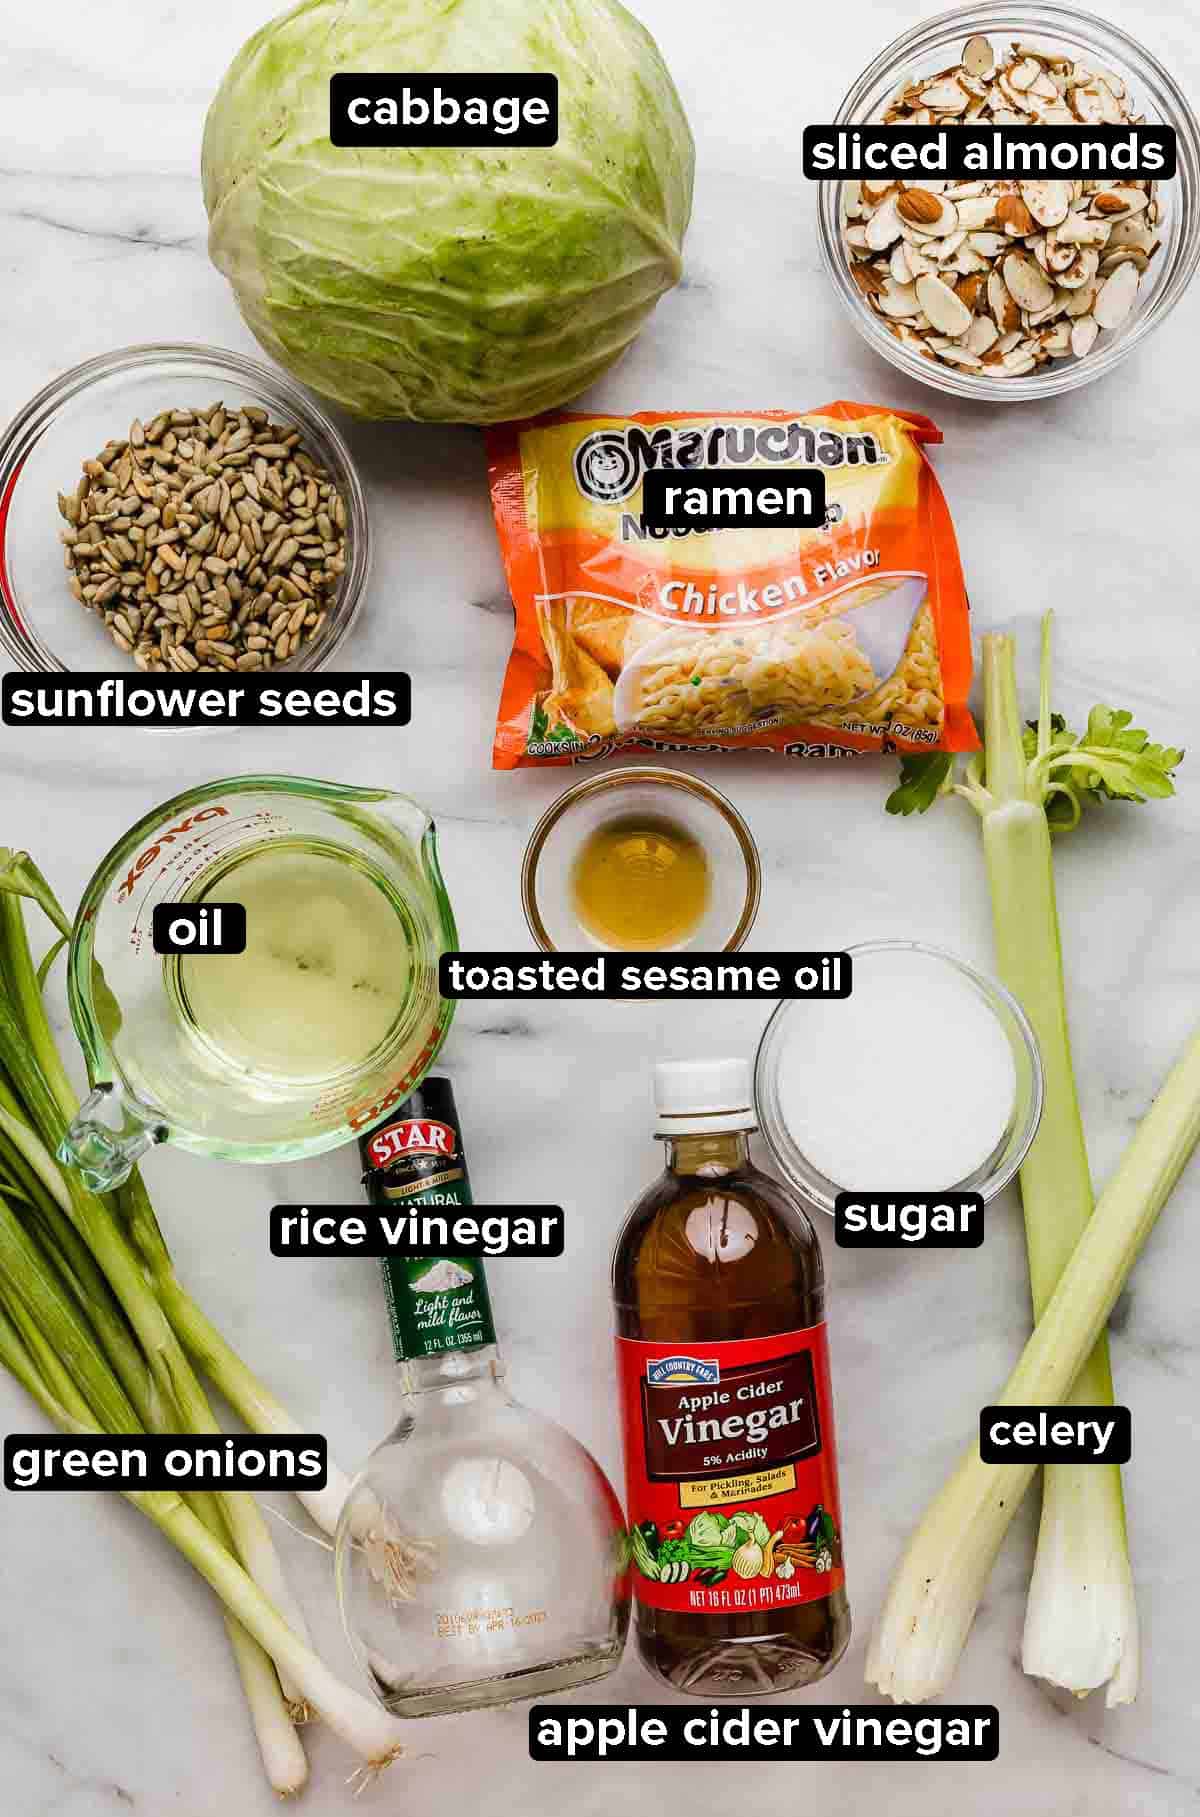 Cabbage salad ingredients on a white background, ingredients include: packet of ramen, celery, green onions, sesame oil, rice vinegar, almonds, sunflower seeds, sugar, cabbage.